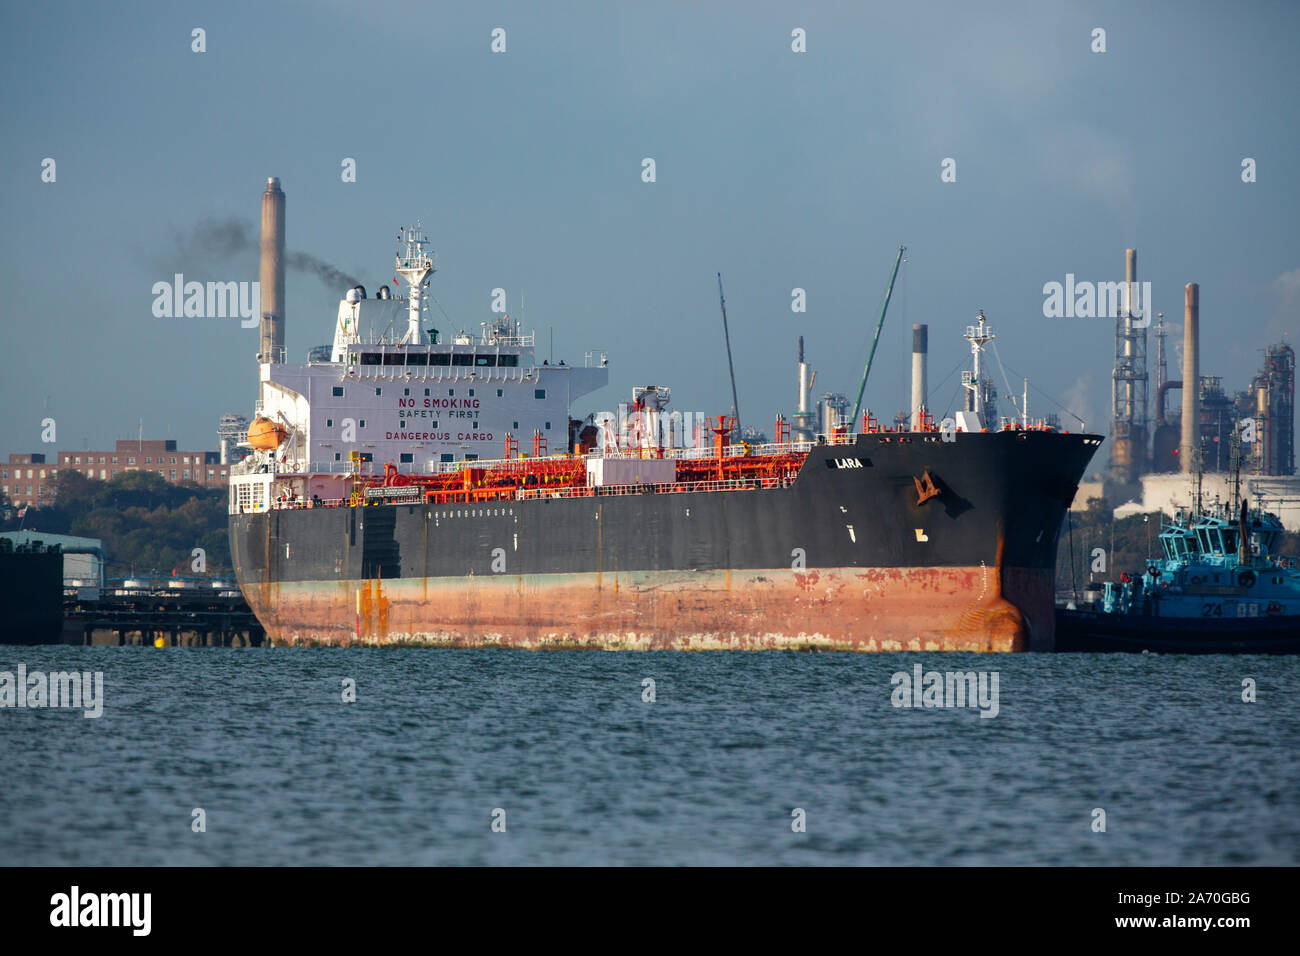 Supertanker Lara coming alongside Fawley oil refinery in Southampton water. Helped by tugs to enter the birth safely. Stock Photo